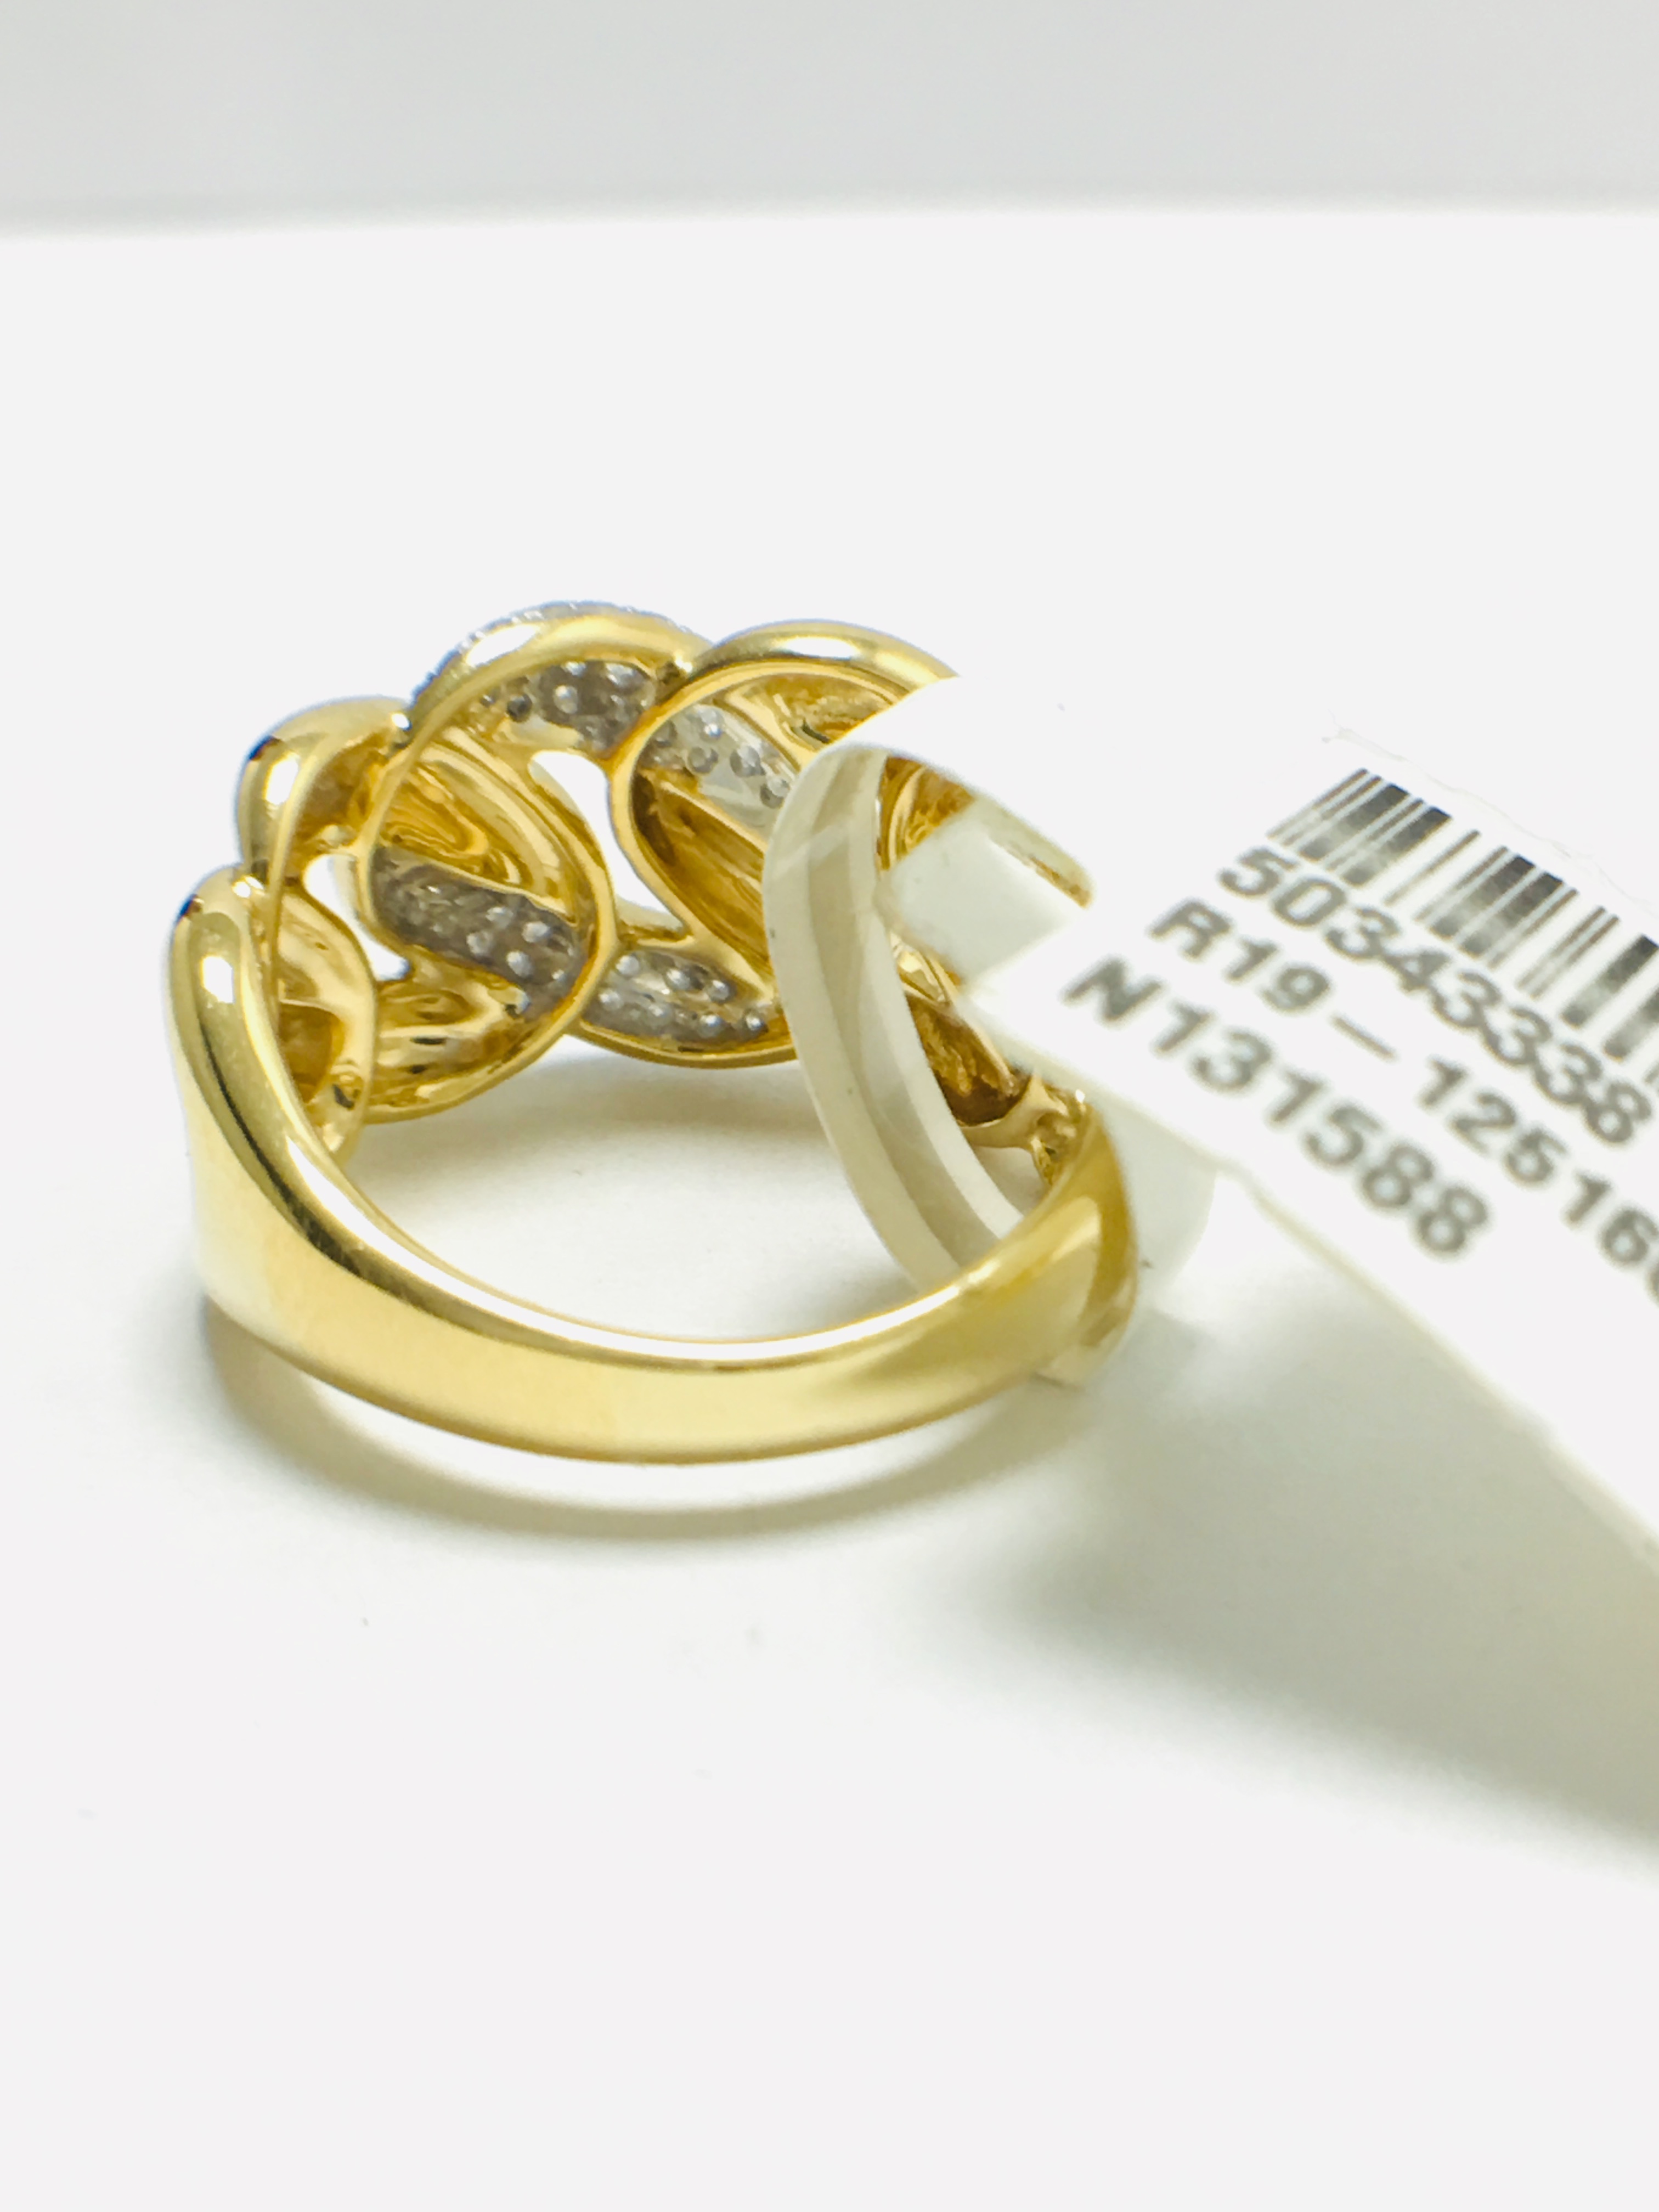 18ct Yellow Diamond Set Curb Style Ring - Image 5 of 9